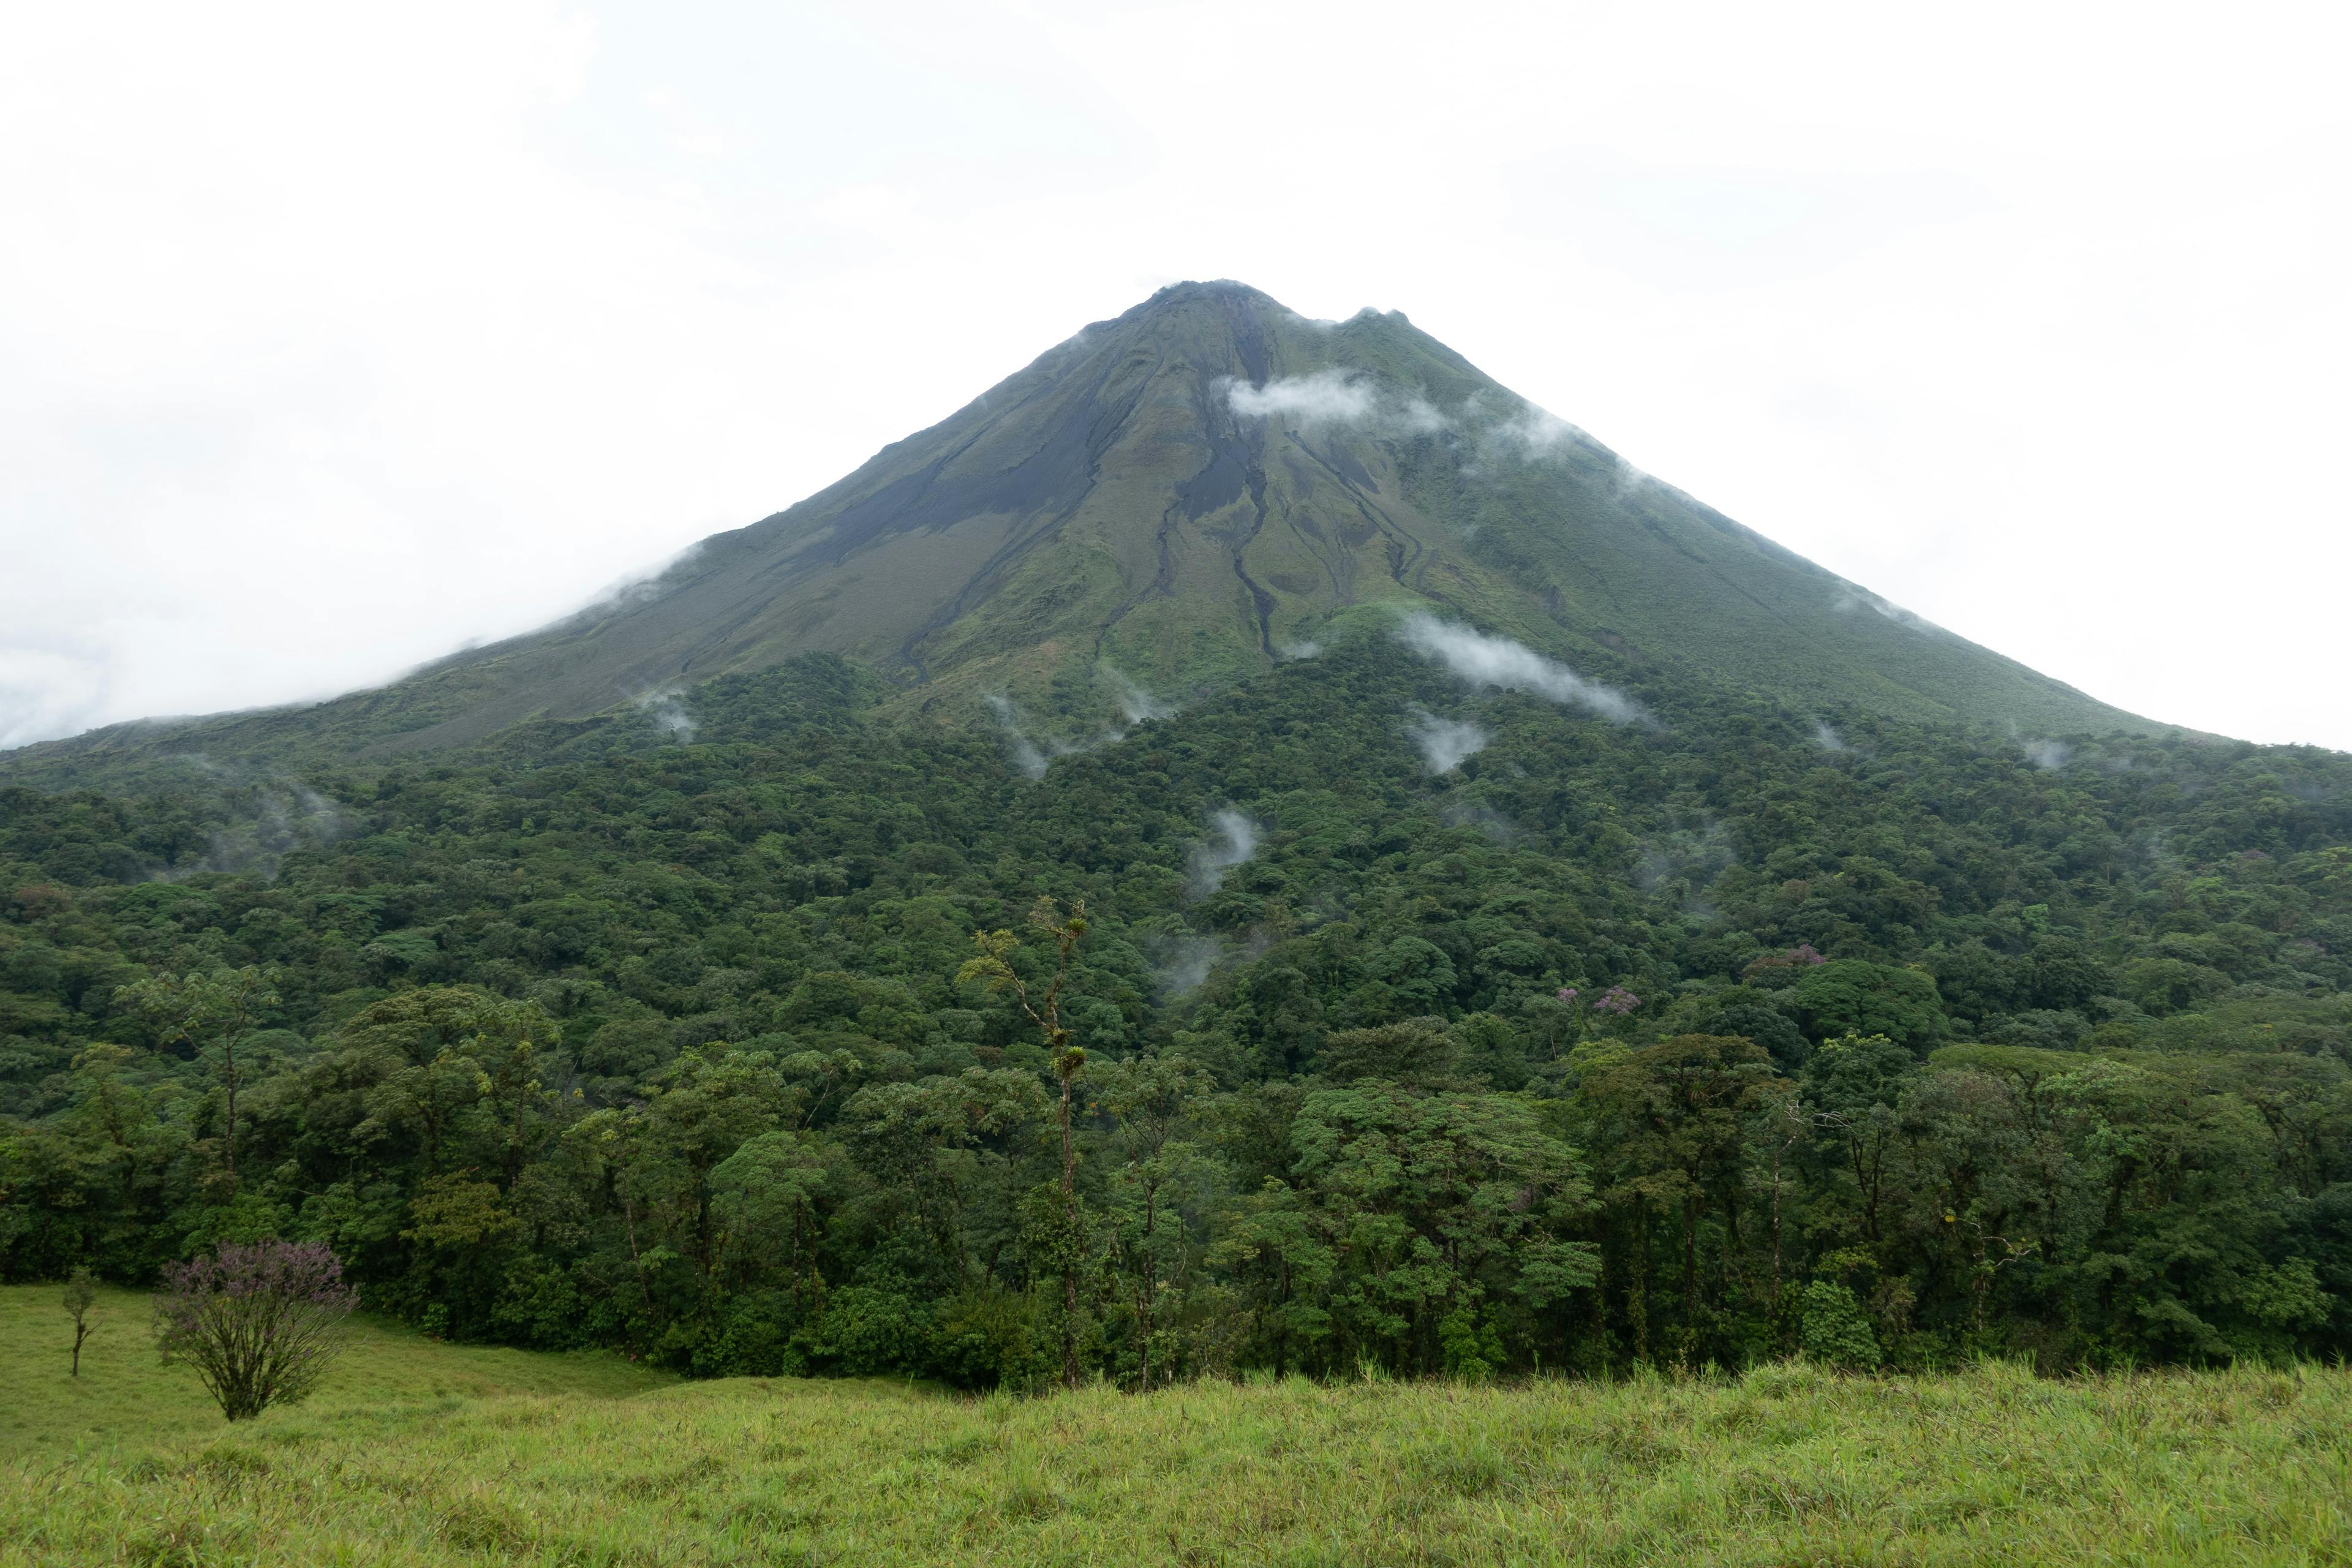 The Arenal volcano fully revealed. The volcano is still very active, although scientists believe the next erruption will not happen for another 340 years. The last erruption wiped out two towns and killed hundreds of people.